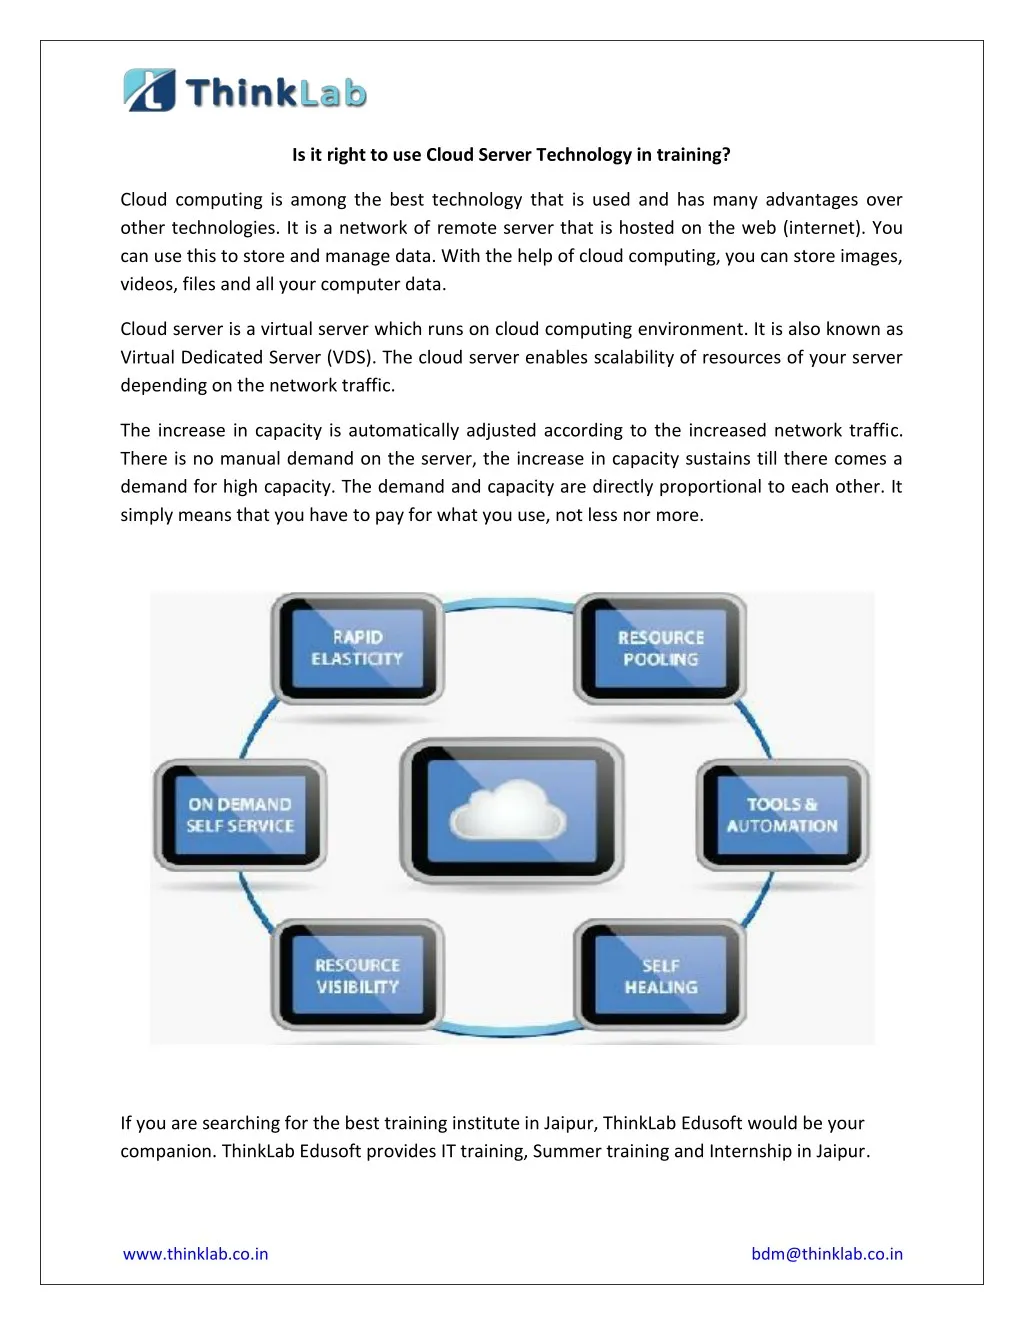 is it right to use cloud server technology